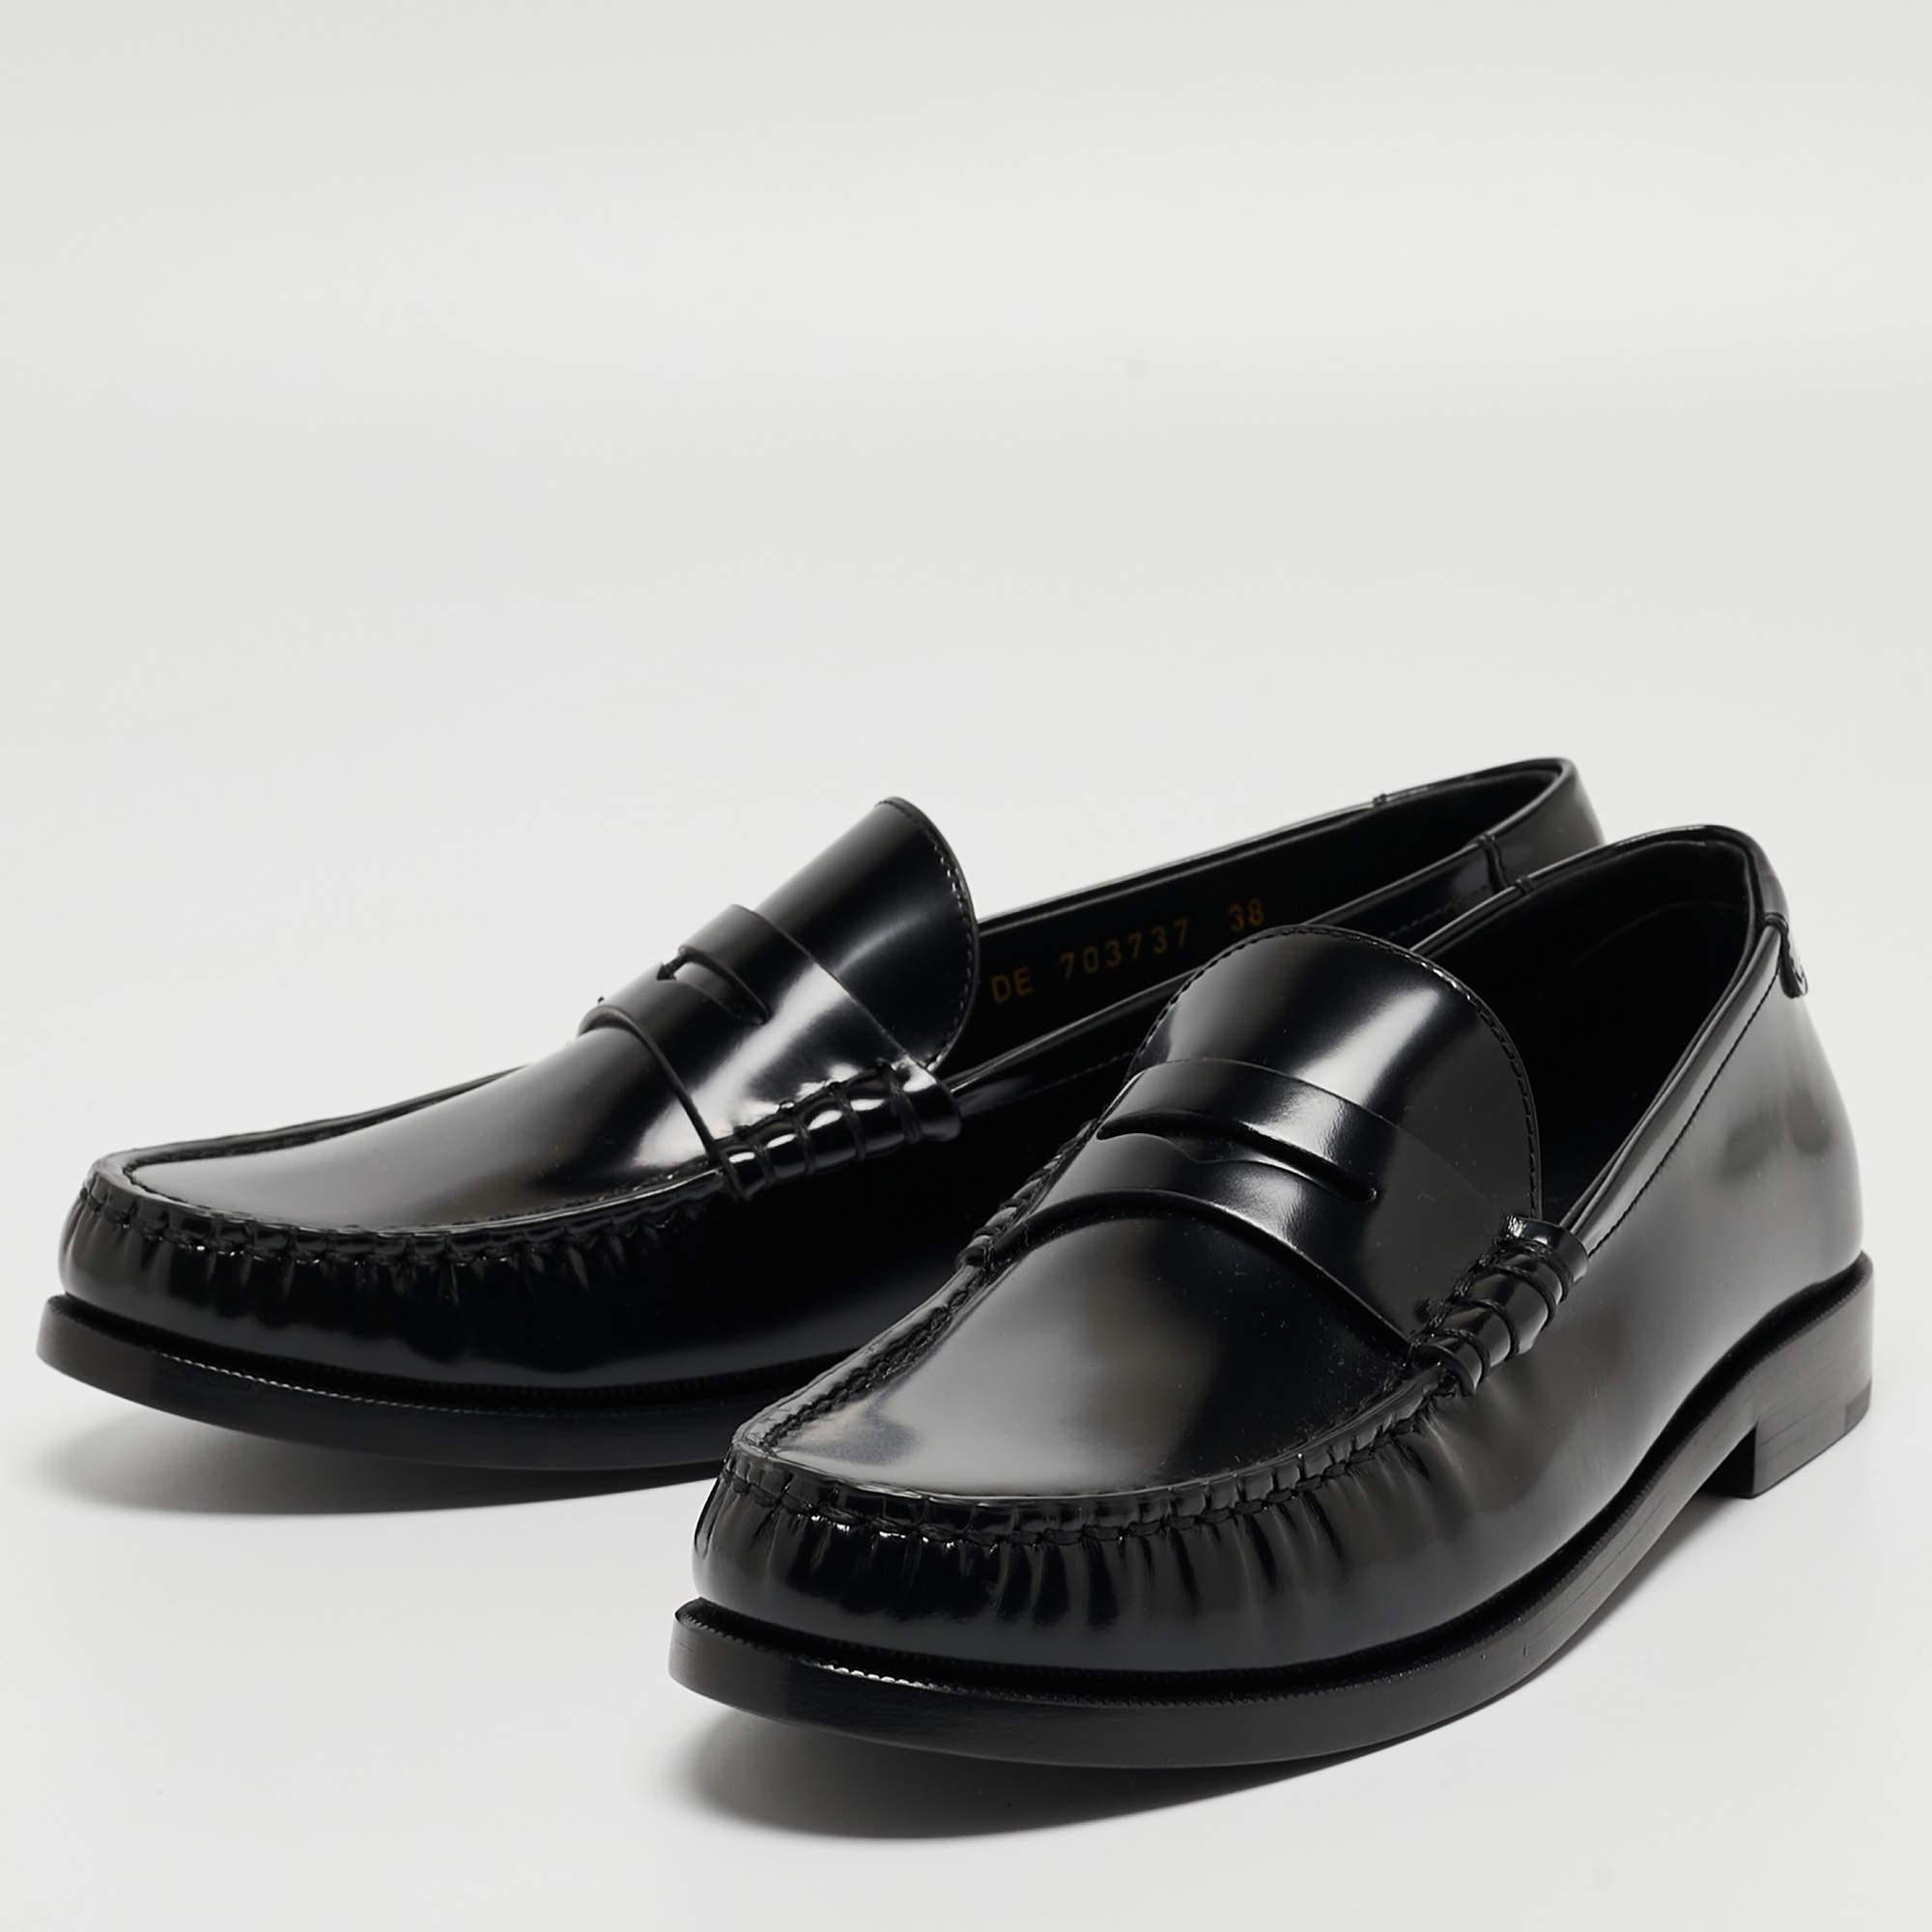 Practical, fashionable, and durable—these Saint Laurent loafers are carefully built to be fine companions to your everyday style. They come made using the best materials to be a prized buy.

